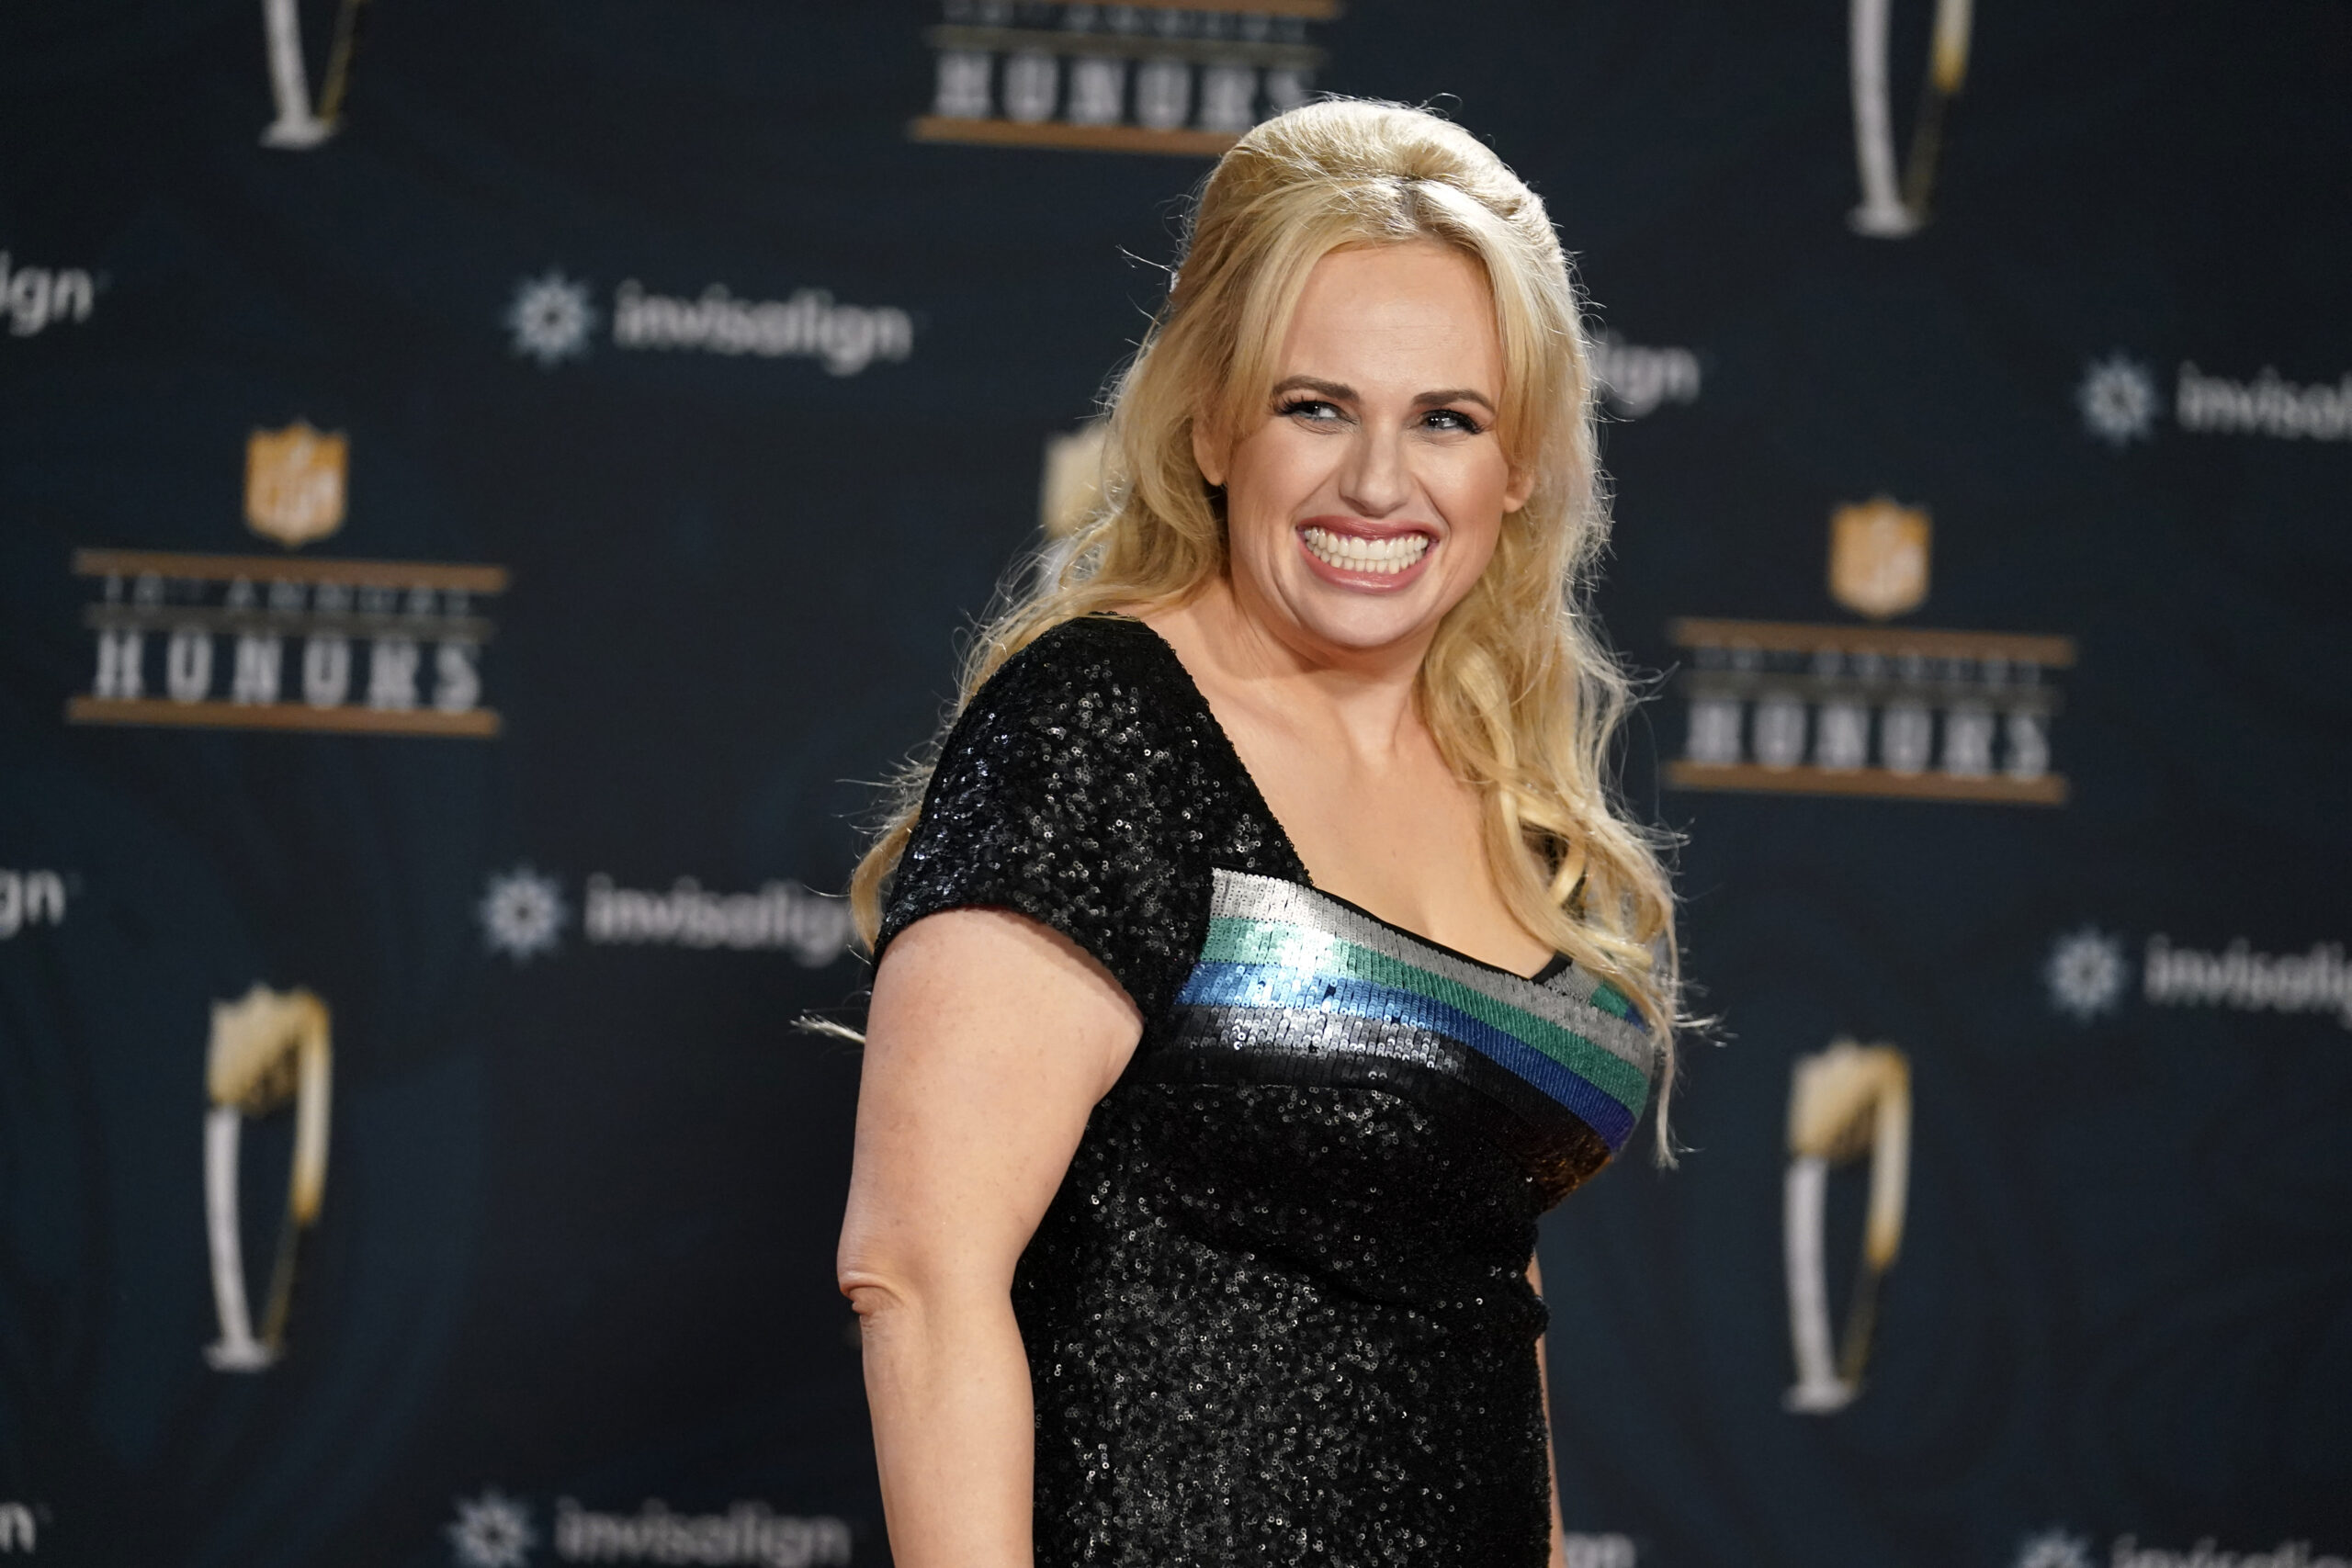 FILE - In this Tuesday, Feb. 2, 2021, file photo, Rebel Wilson poses on the red carpet during the NFL Honors football awards show, in Los Angeles. Wilson returns to her roots as host of ABC's “Pooch Perfect,” an eight-episode series featuring 10 dog groomers and their assistants competing in challenges. The show, which debuts March 30, is based on an Australian version. (AP Photo/Marcio Jose Sanchez, File)